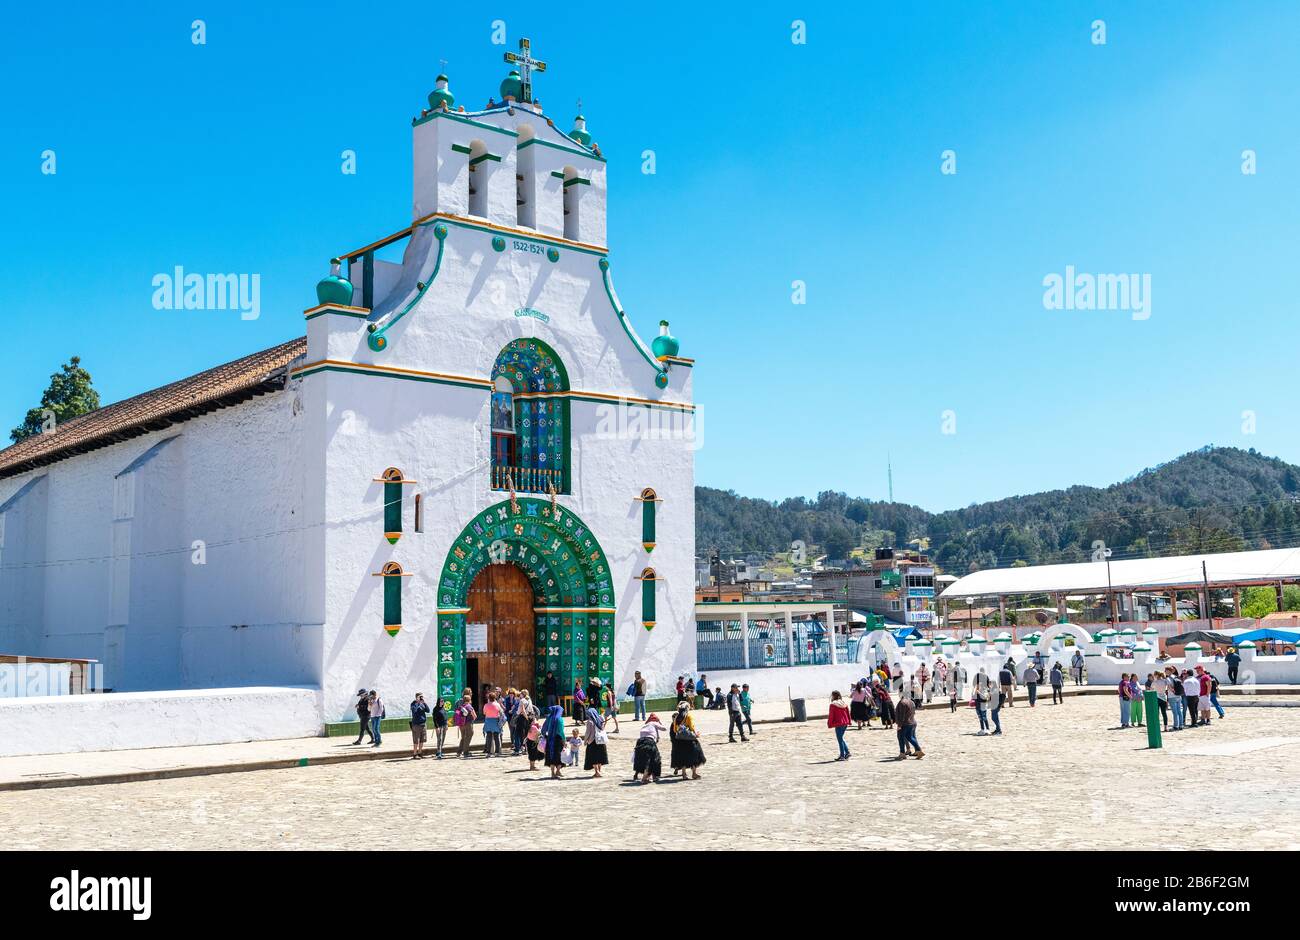 Indigenous Mayan people walking into the church dating from the 16th century in San Juan Chamula near San Cristobal de las Casas, Mexico. Stock Photo